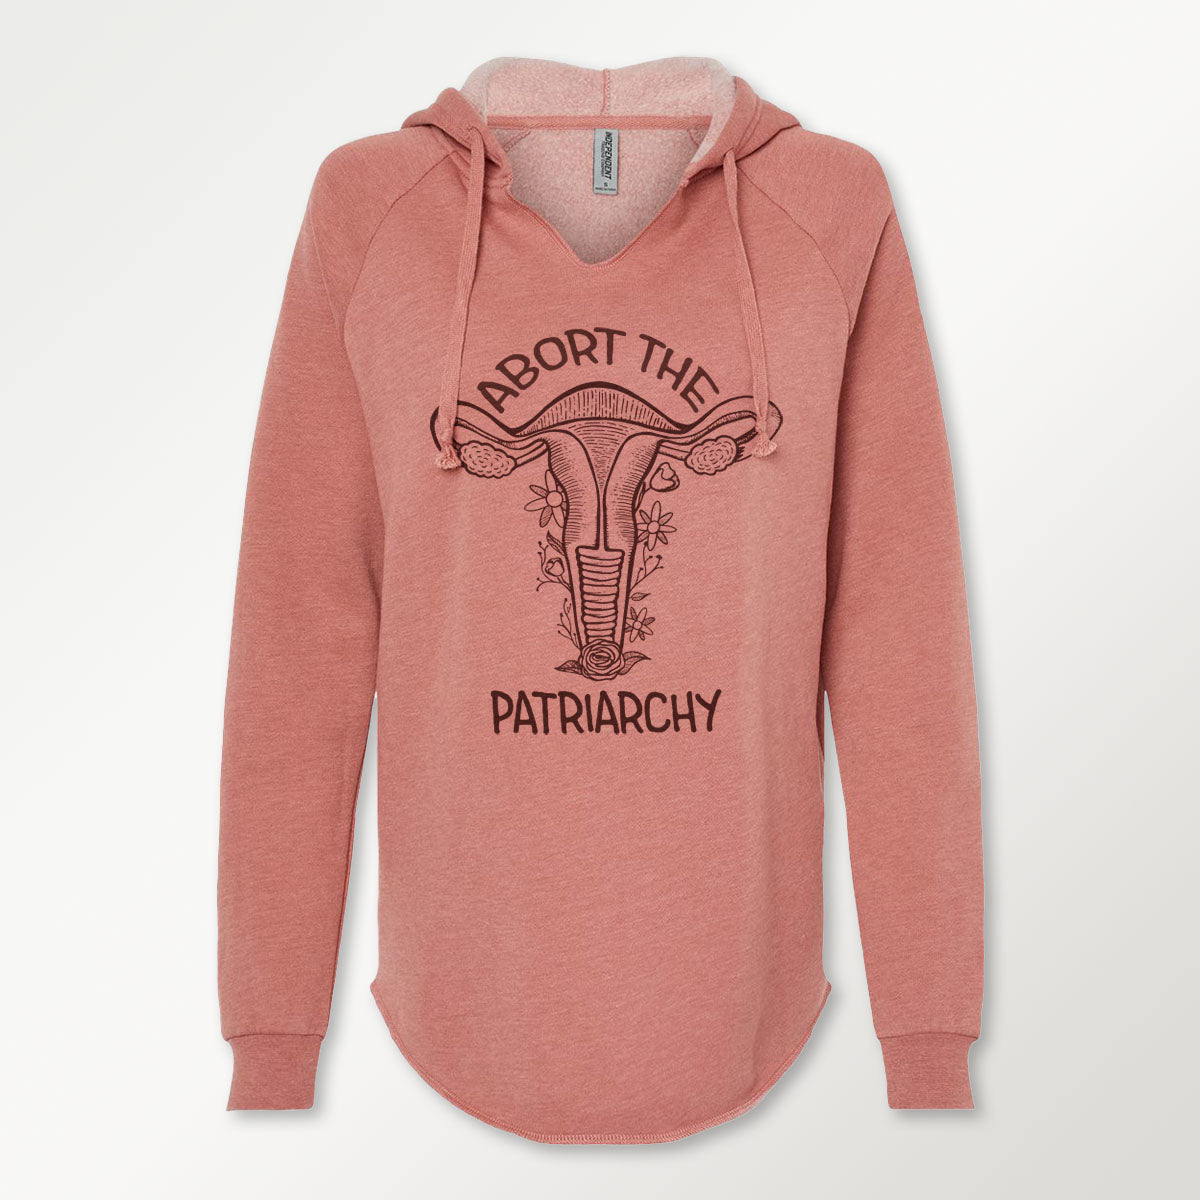 dusty rose colored hooded sweatshirt with a black screen printed floral uterus graphic and "abort the patriarchy" text